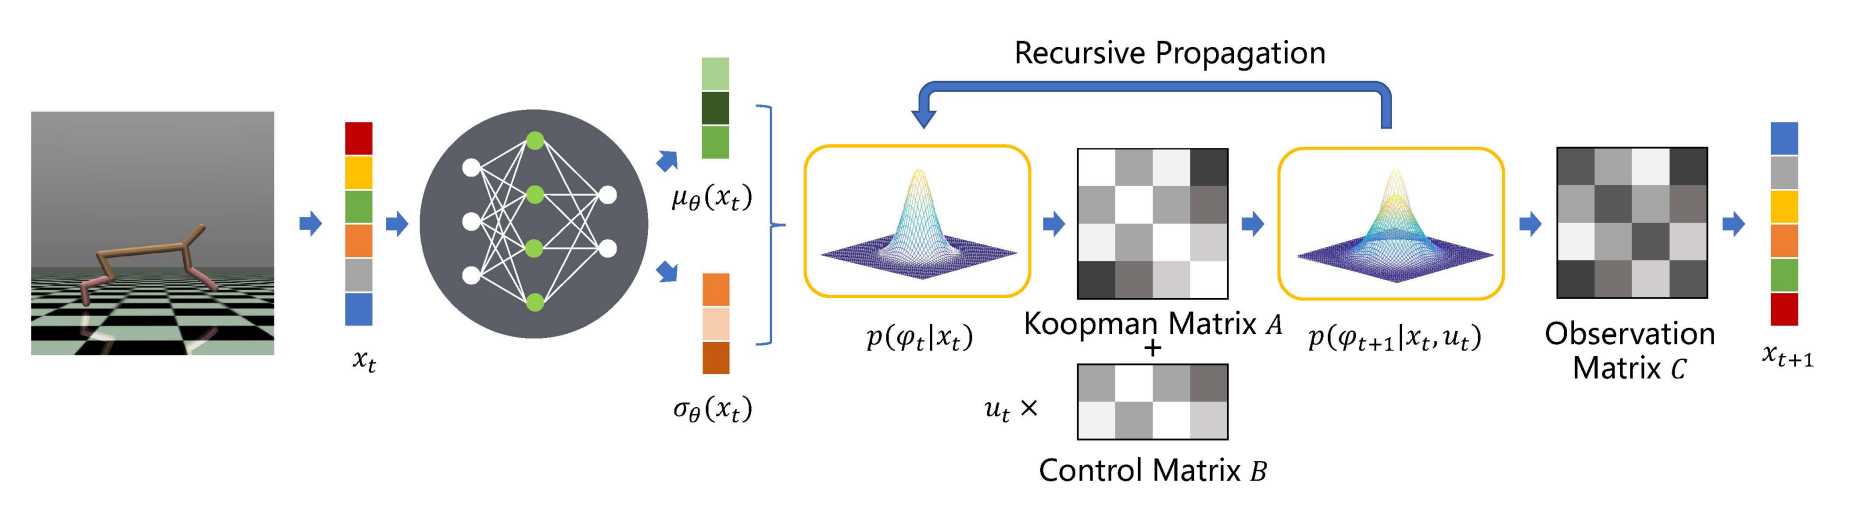 DESKO: STABILITY-ASSURED ROBUST CONTROL WITH A DEEP STOCHASTIC KOOPMAN OPERATOR